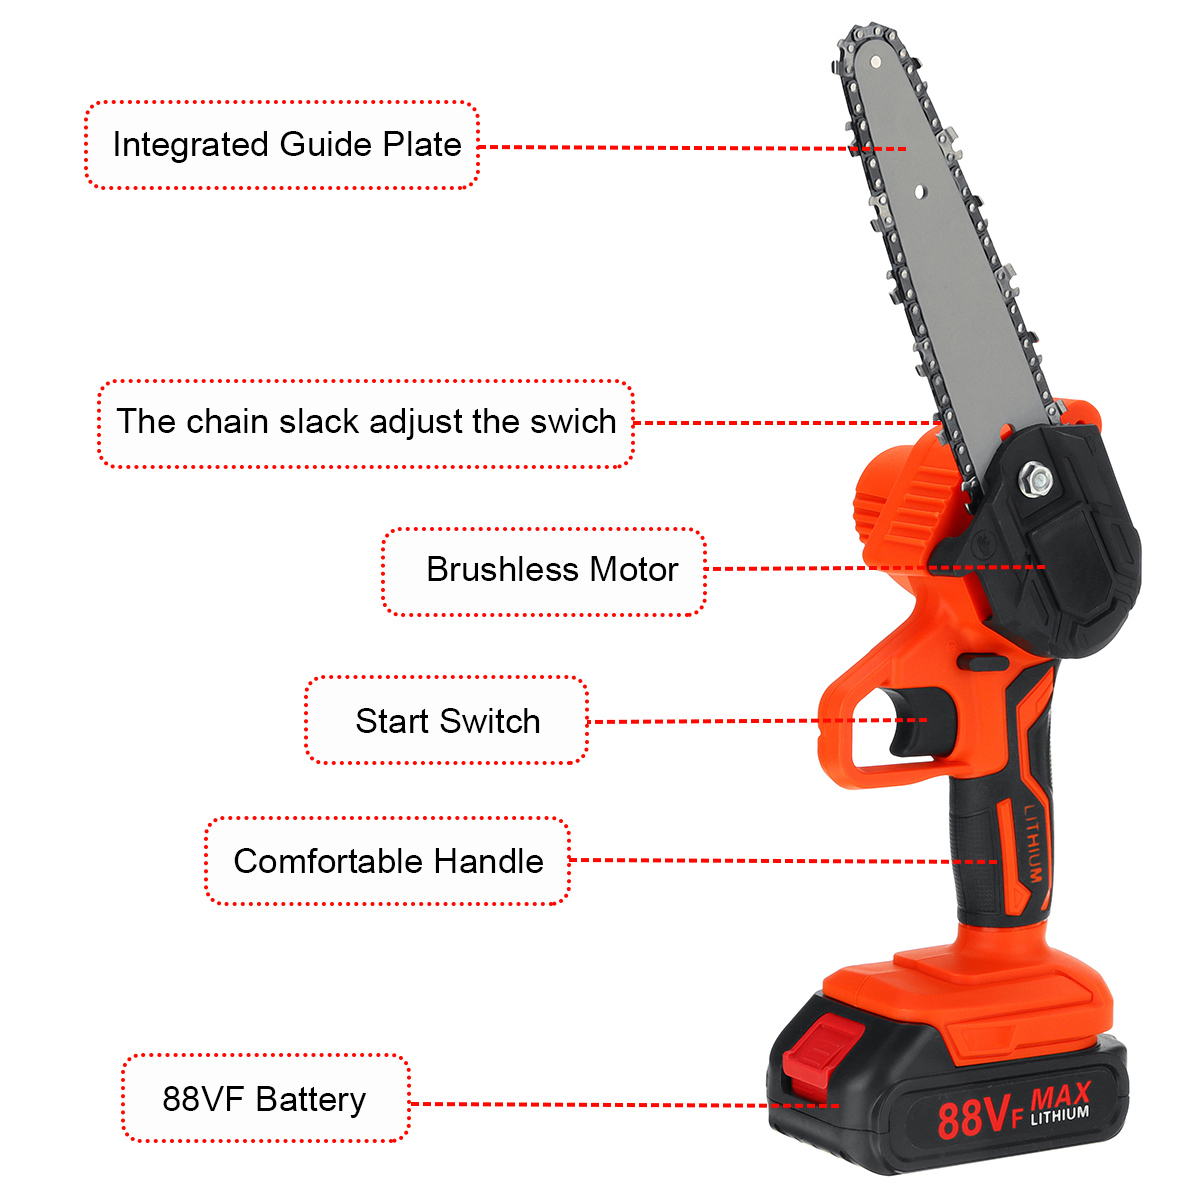 88VF-4Inch-6Inch-Cordless-Electric-Chain-Saw-One-Hand-Mini-Saw-Wood-Cutter-Woodworking-Tool-W-12-Bat-1870556-10